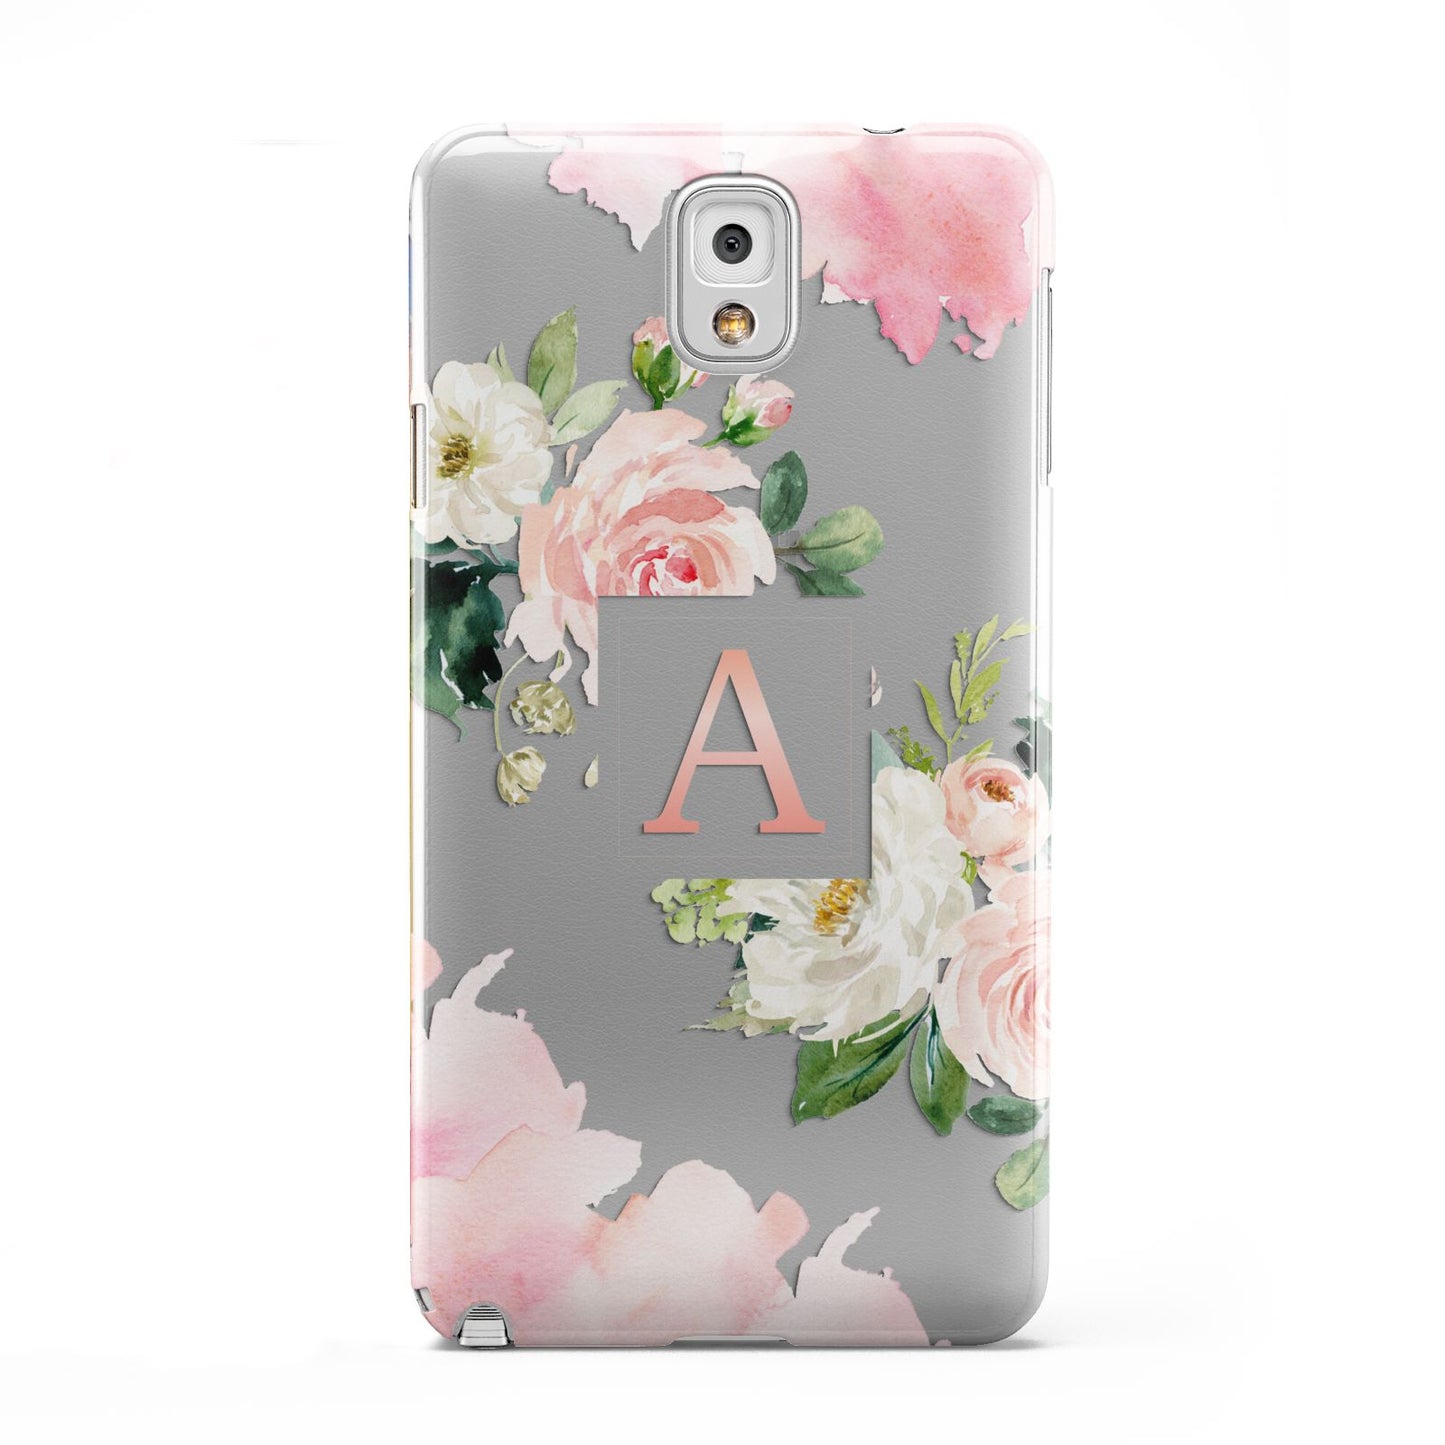 Pink Monogram Floral Roses Personalised Samsung Galaxy Note 3 Case